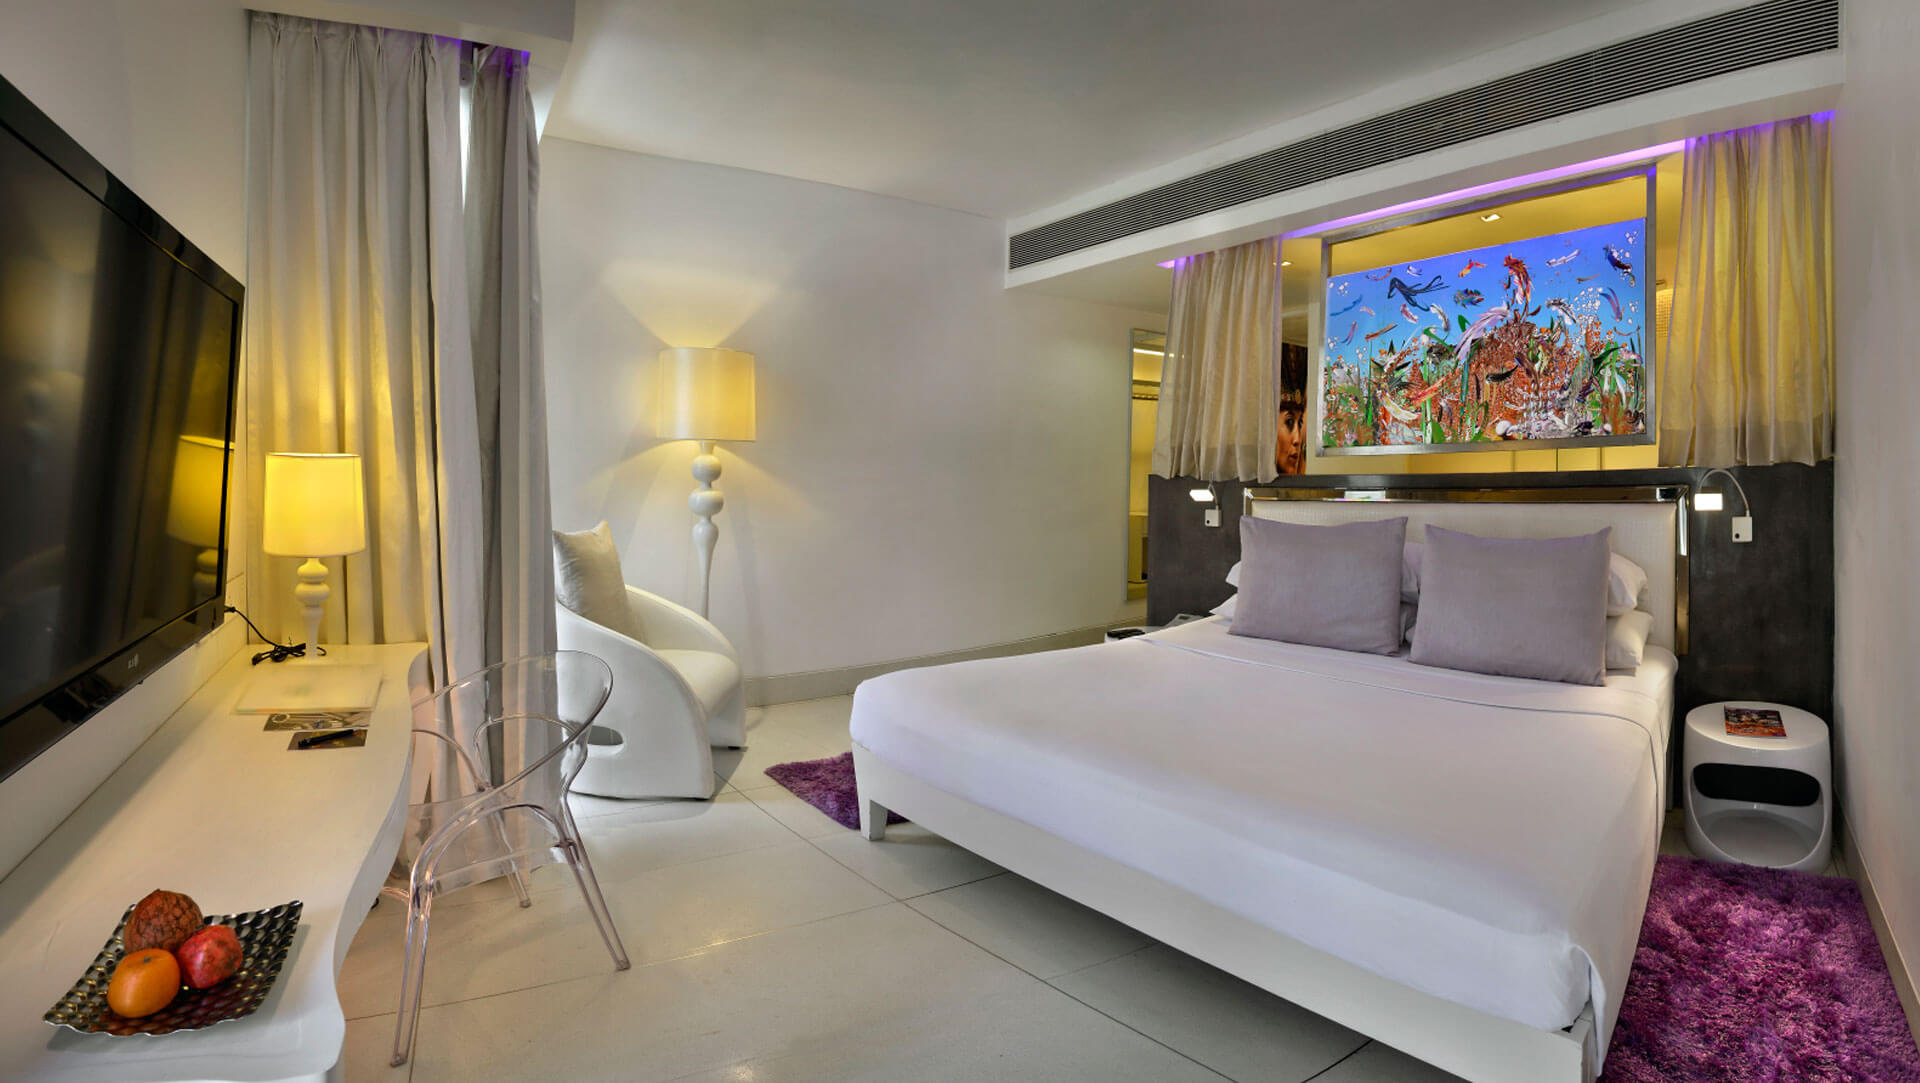 Deluxe Rooms at The Park Hotels Calangute